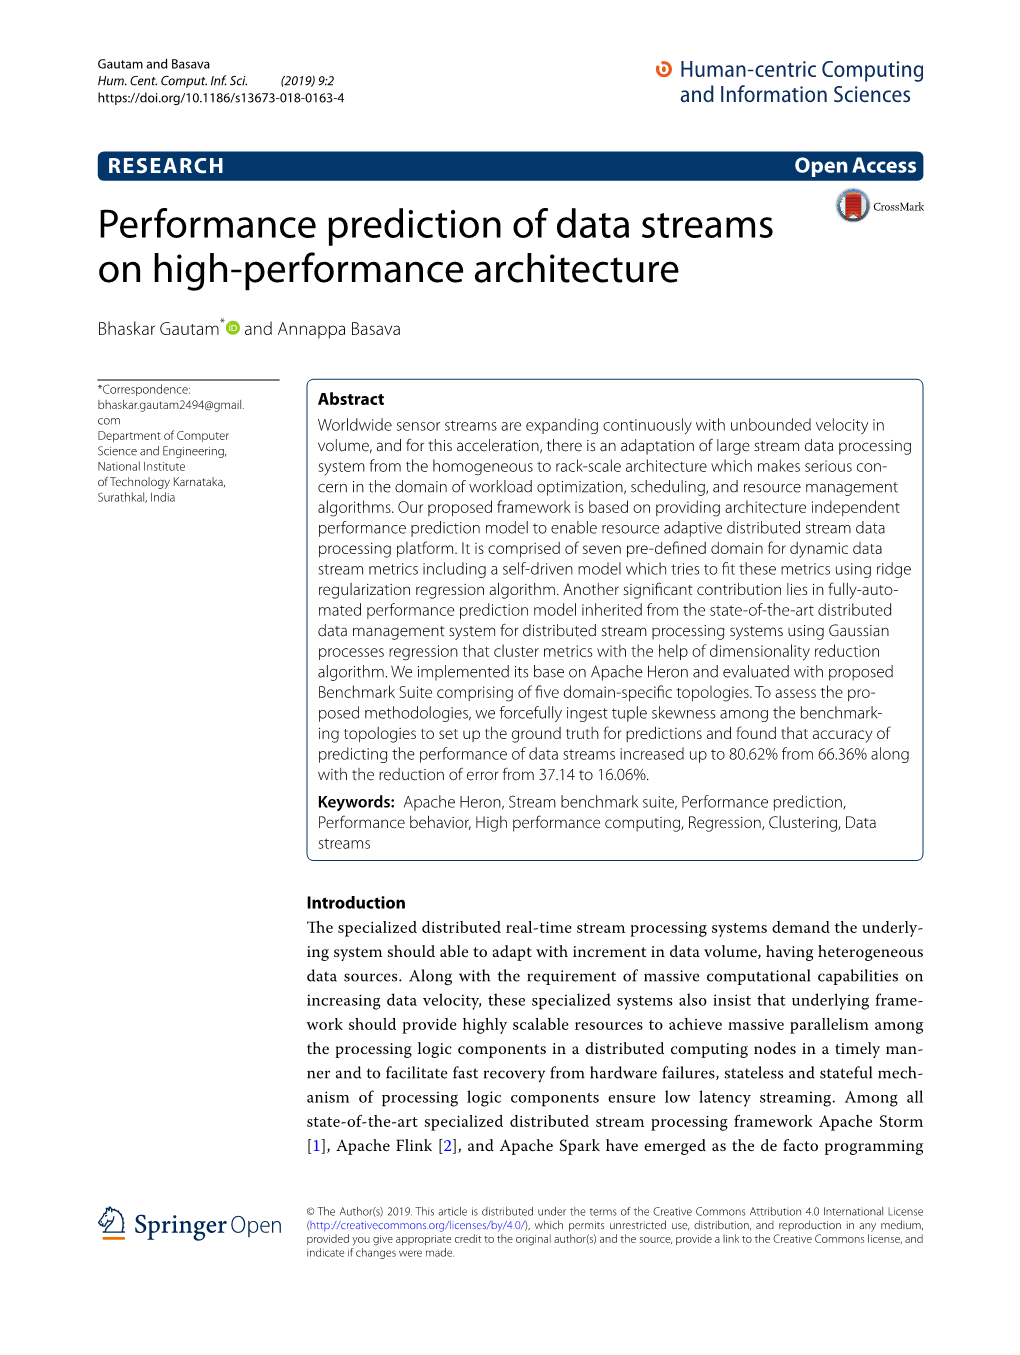 Performance Prediction of Data Streams on High-Performance